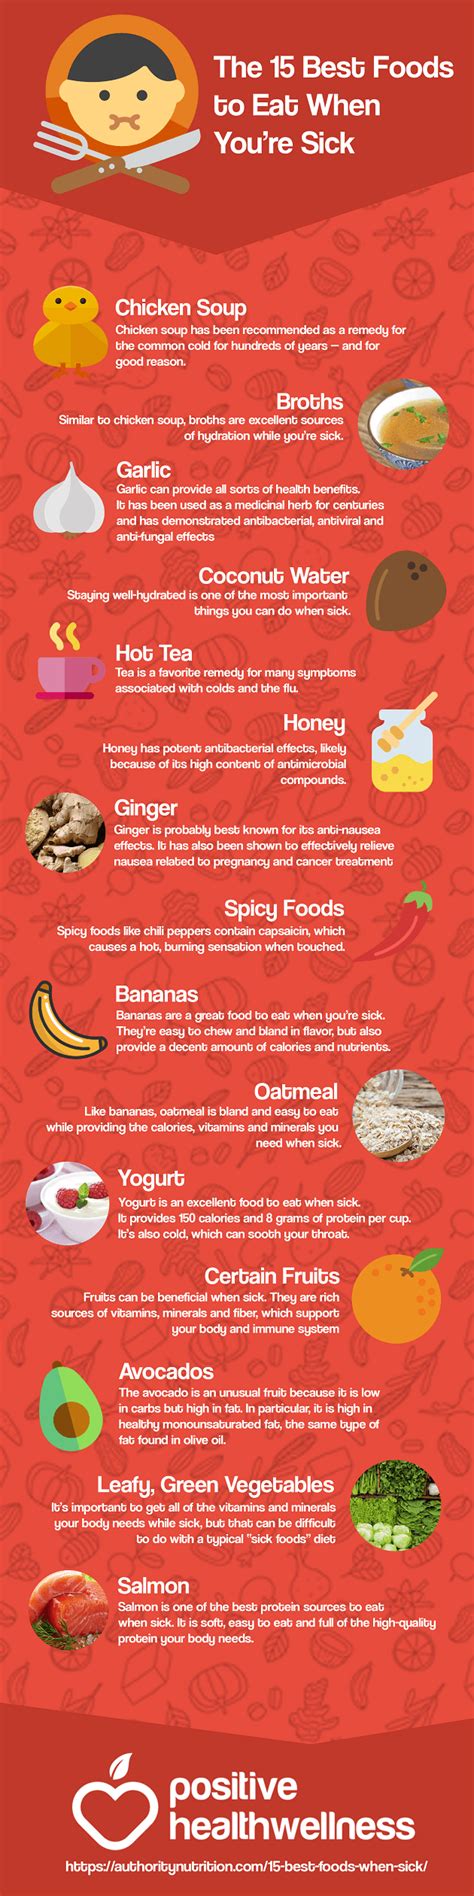 the 15 best foods to eat when you re sick infographic